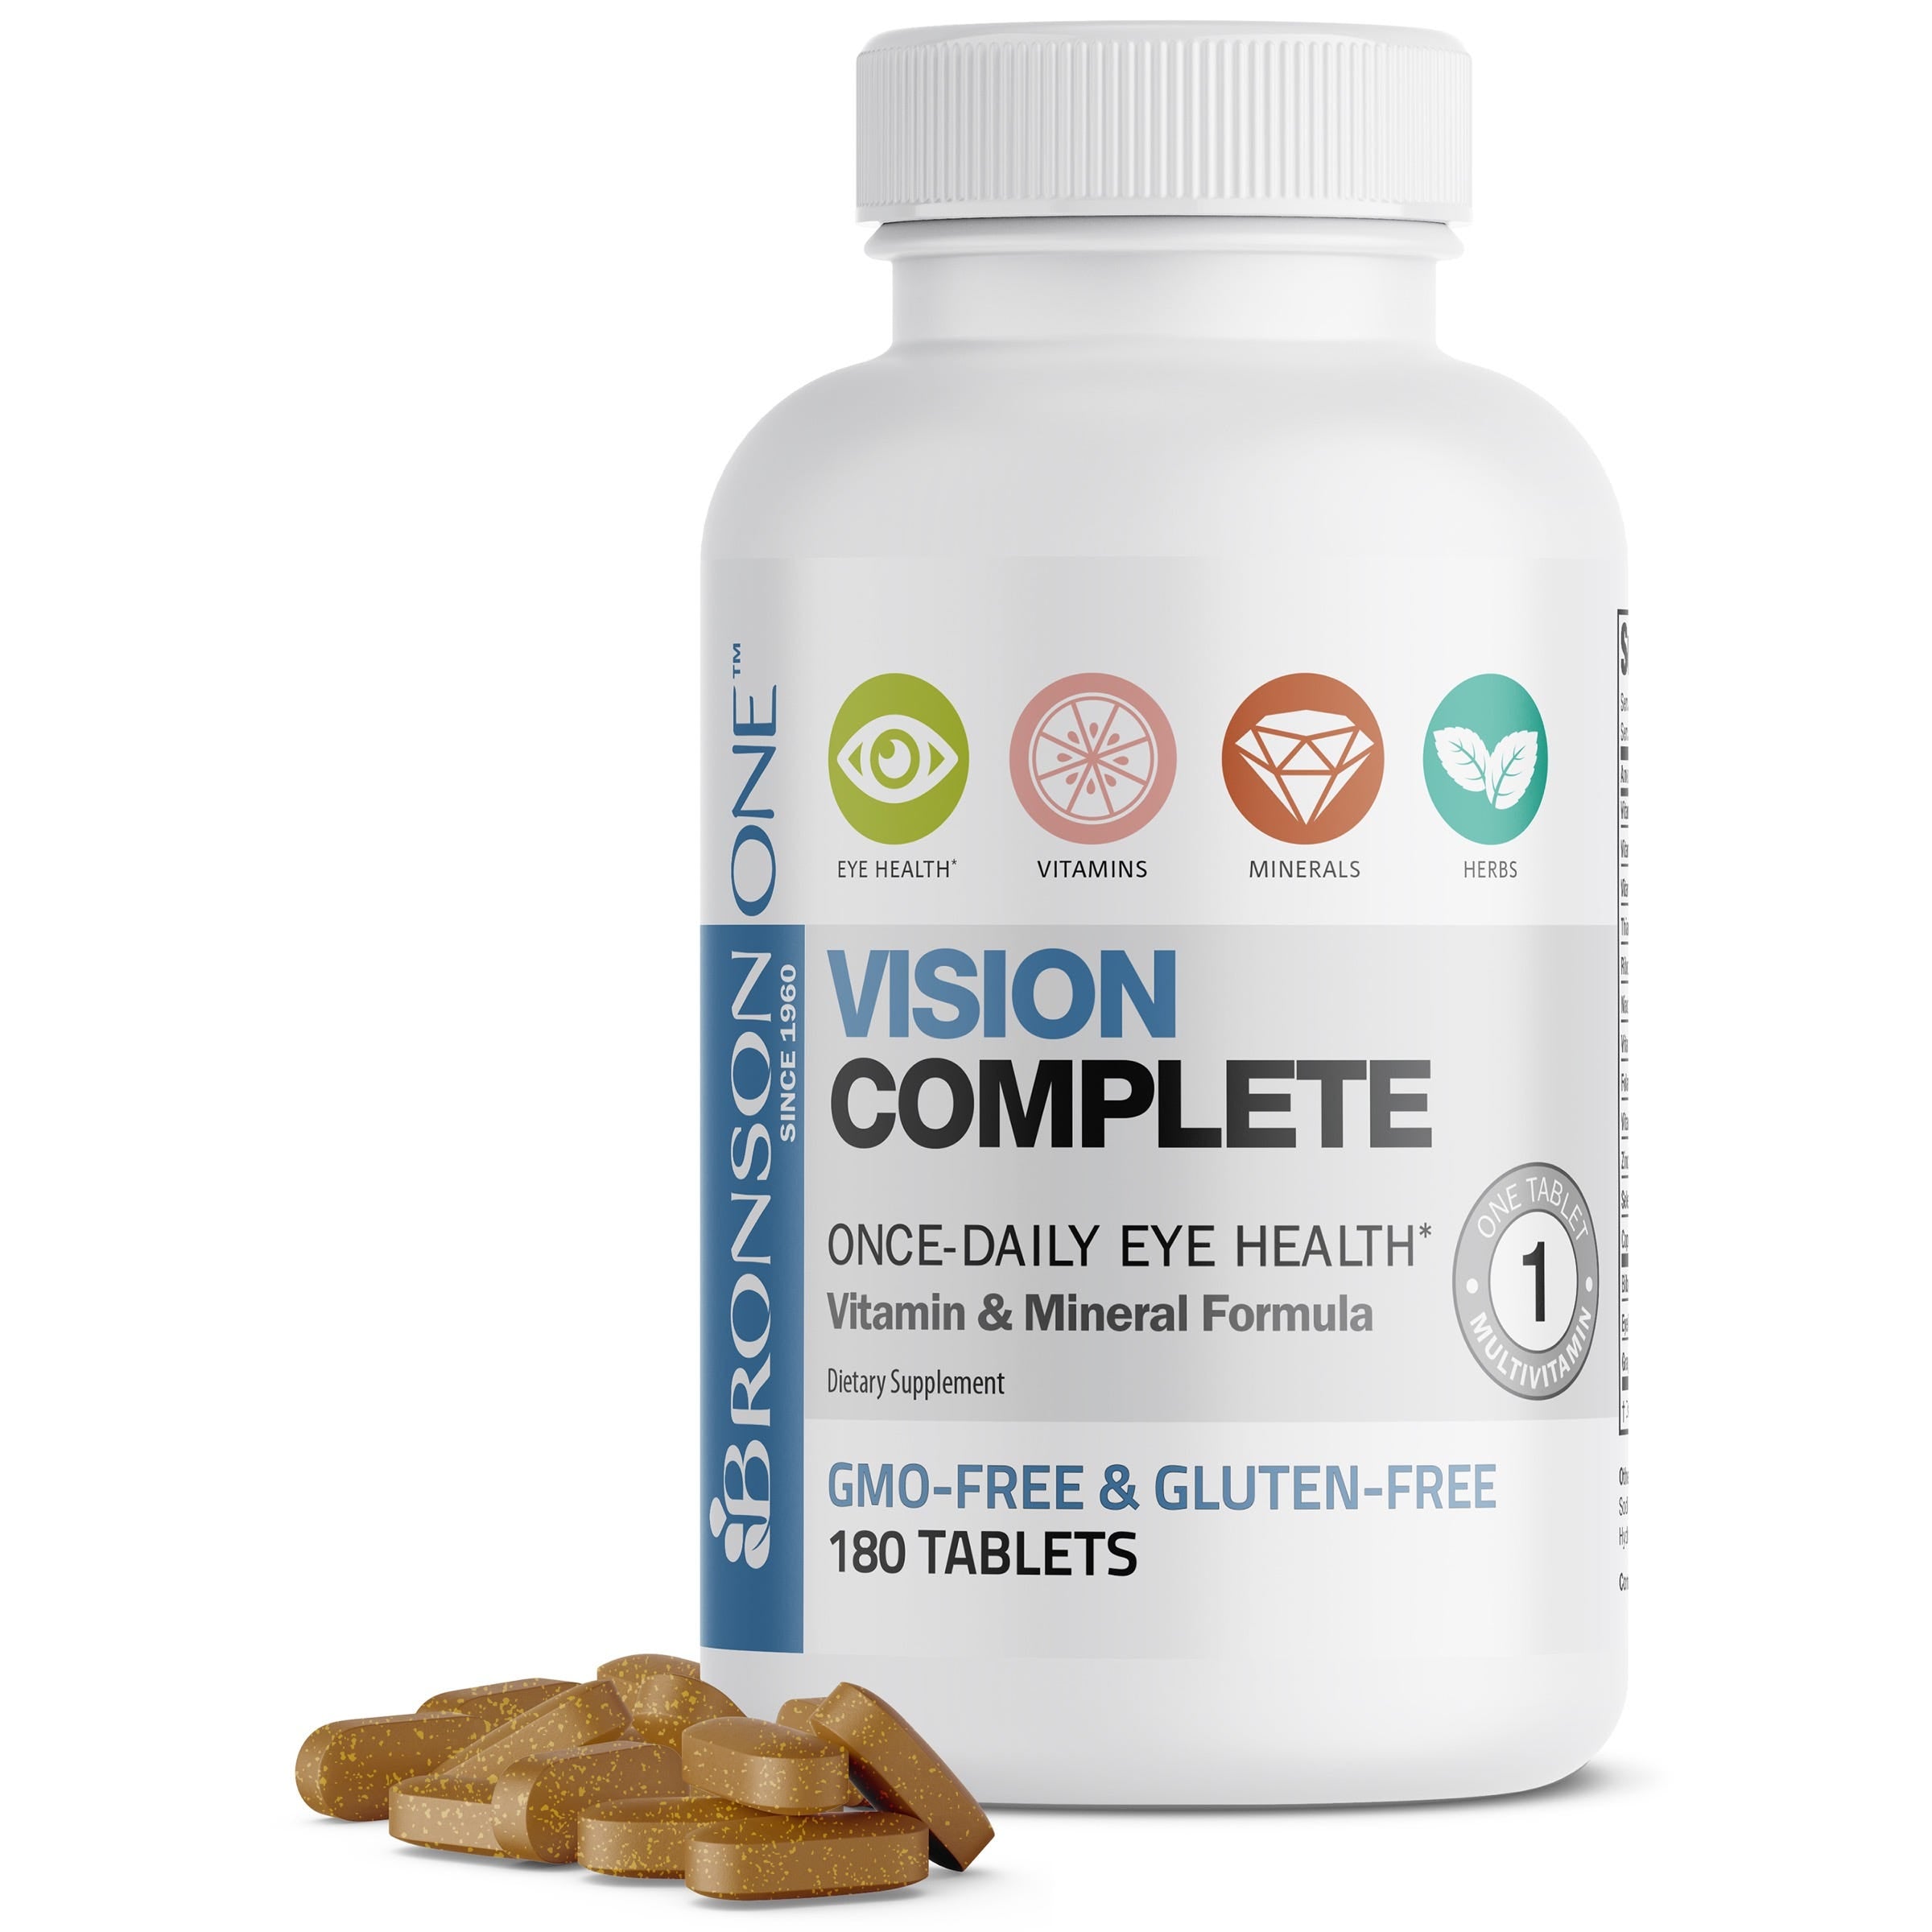 Bronson One™ Daily Vision Complete - 180 Tablets view 3 of 7